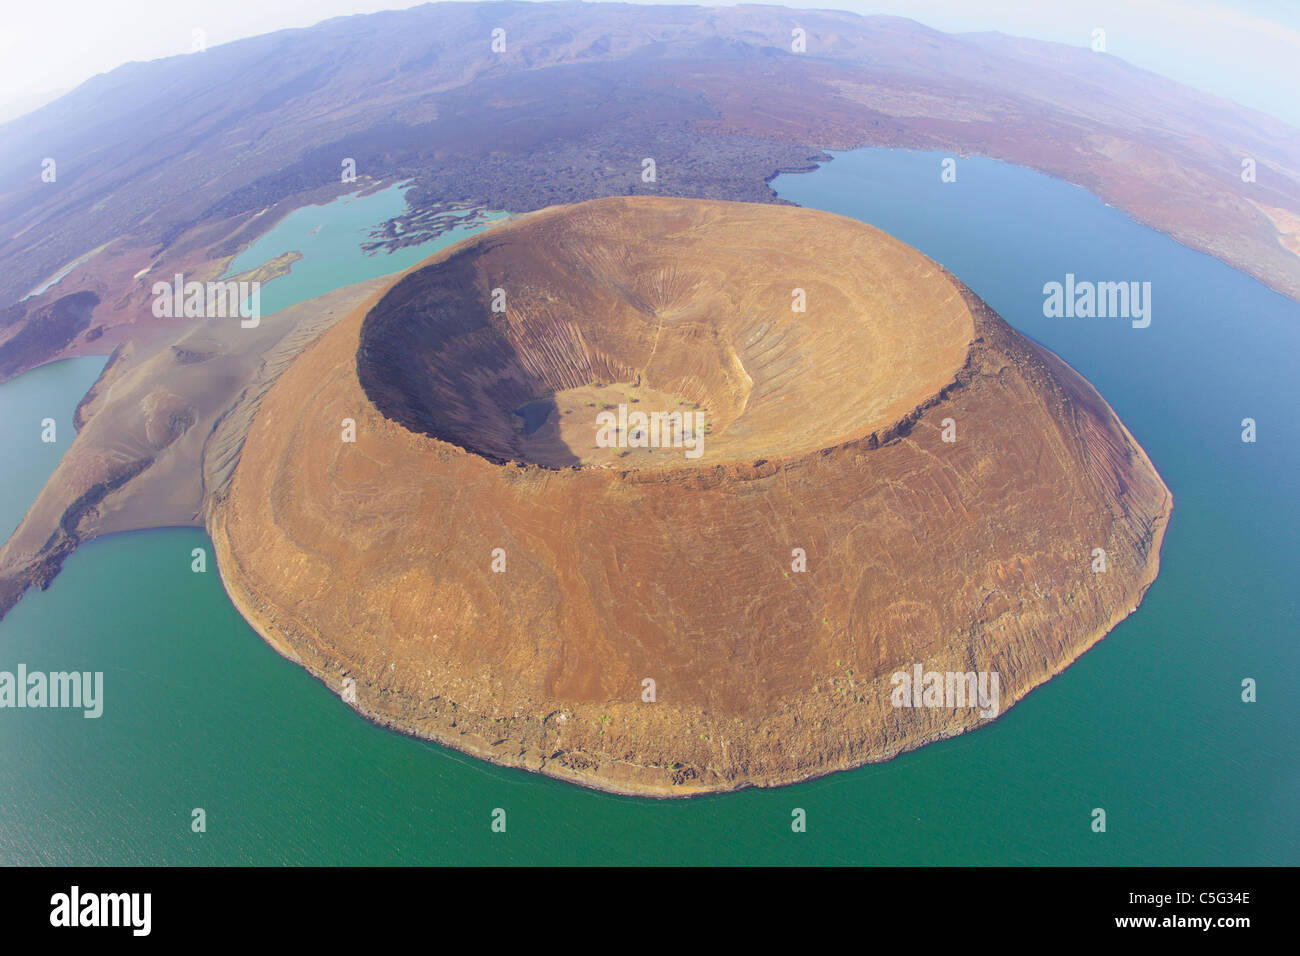 Lake Turkana is situated in the Great Rift Valley in Kenya.It is the world’s largest desert lake. Stock Photo